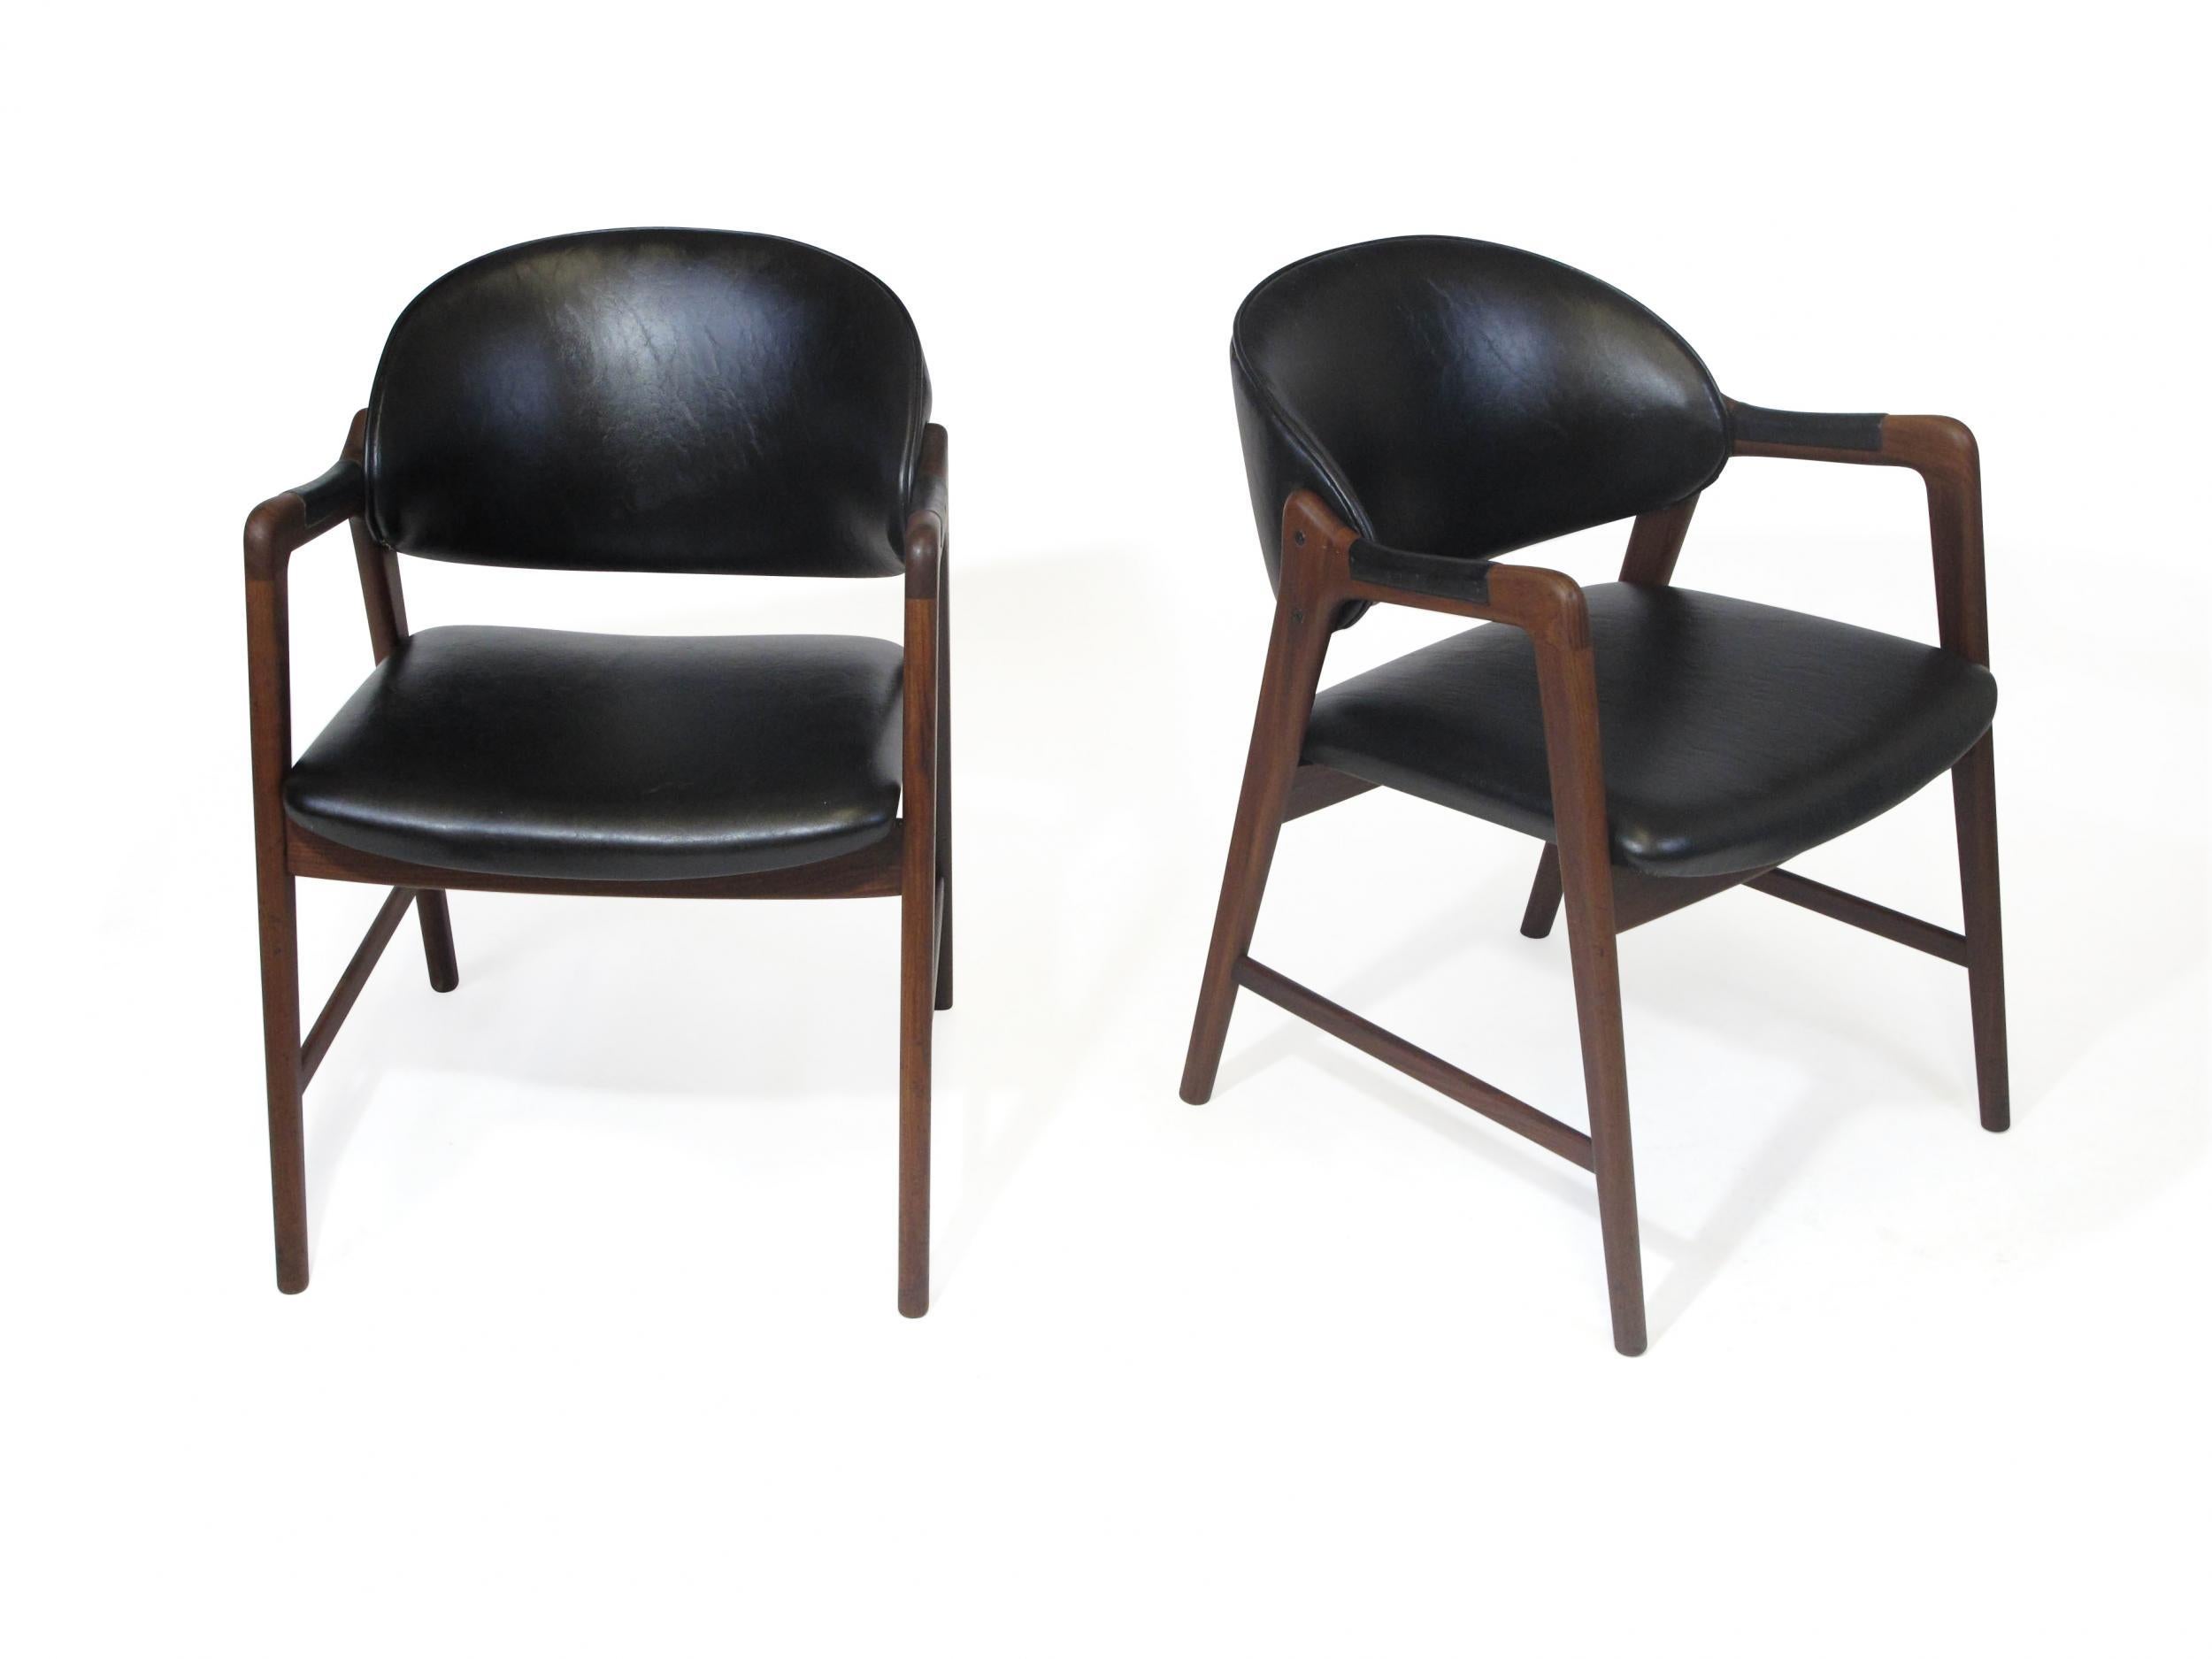 Midcentury Danish Walnut Armchairs in Black In Good Condition For Sale In Oakland, CA